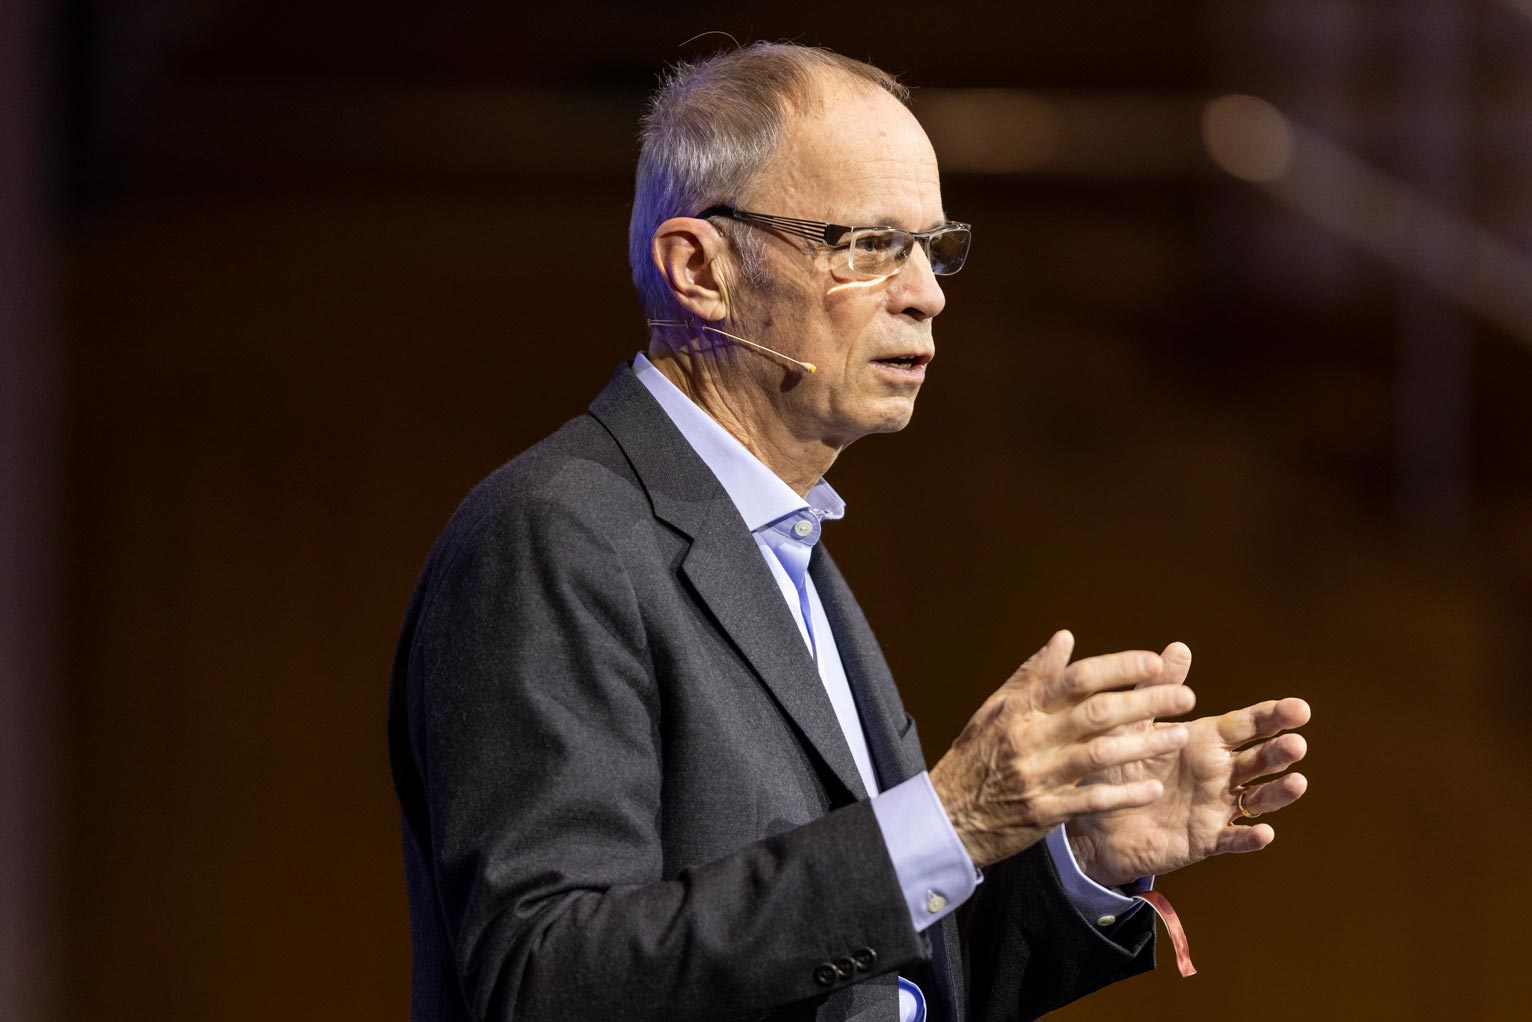 Prof. Jean Tirole is honorary chairman of the Foundation JJ Laffont-Toulouse School of Economics. He was awarded the 2014 Nobel Prize for Economics in recognition of his innovative contributions to the study of monopolistic industries, or industries that consist of only a few powerful firms.